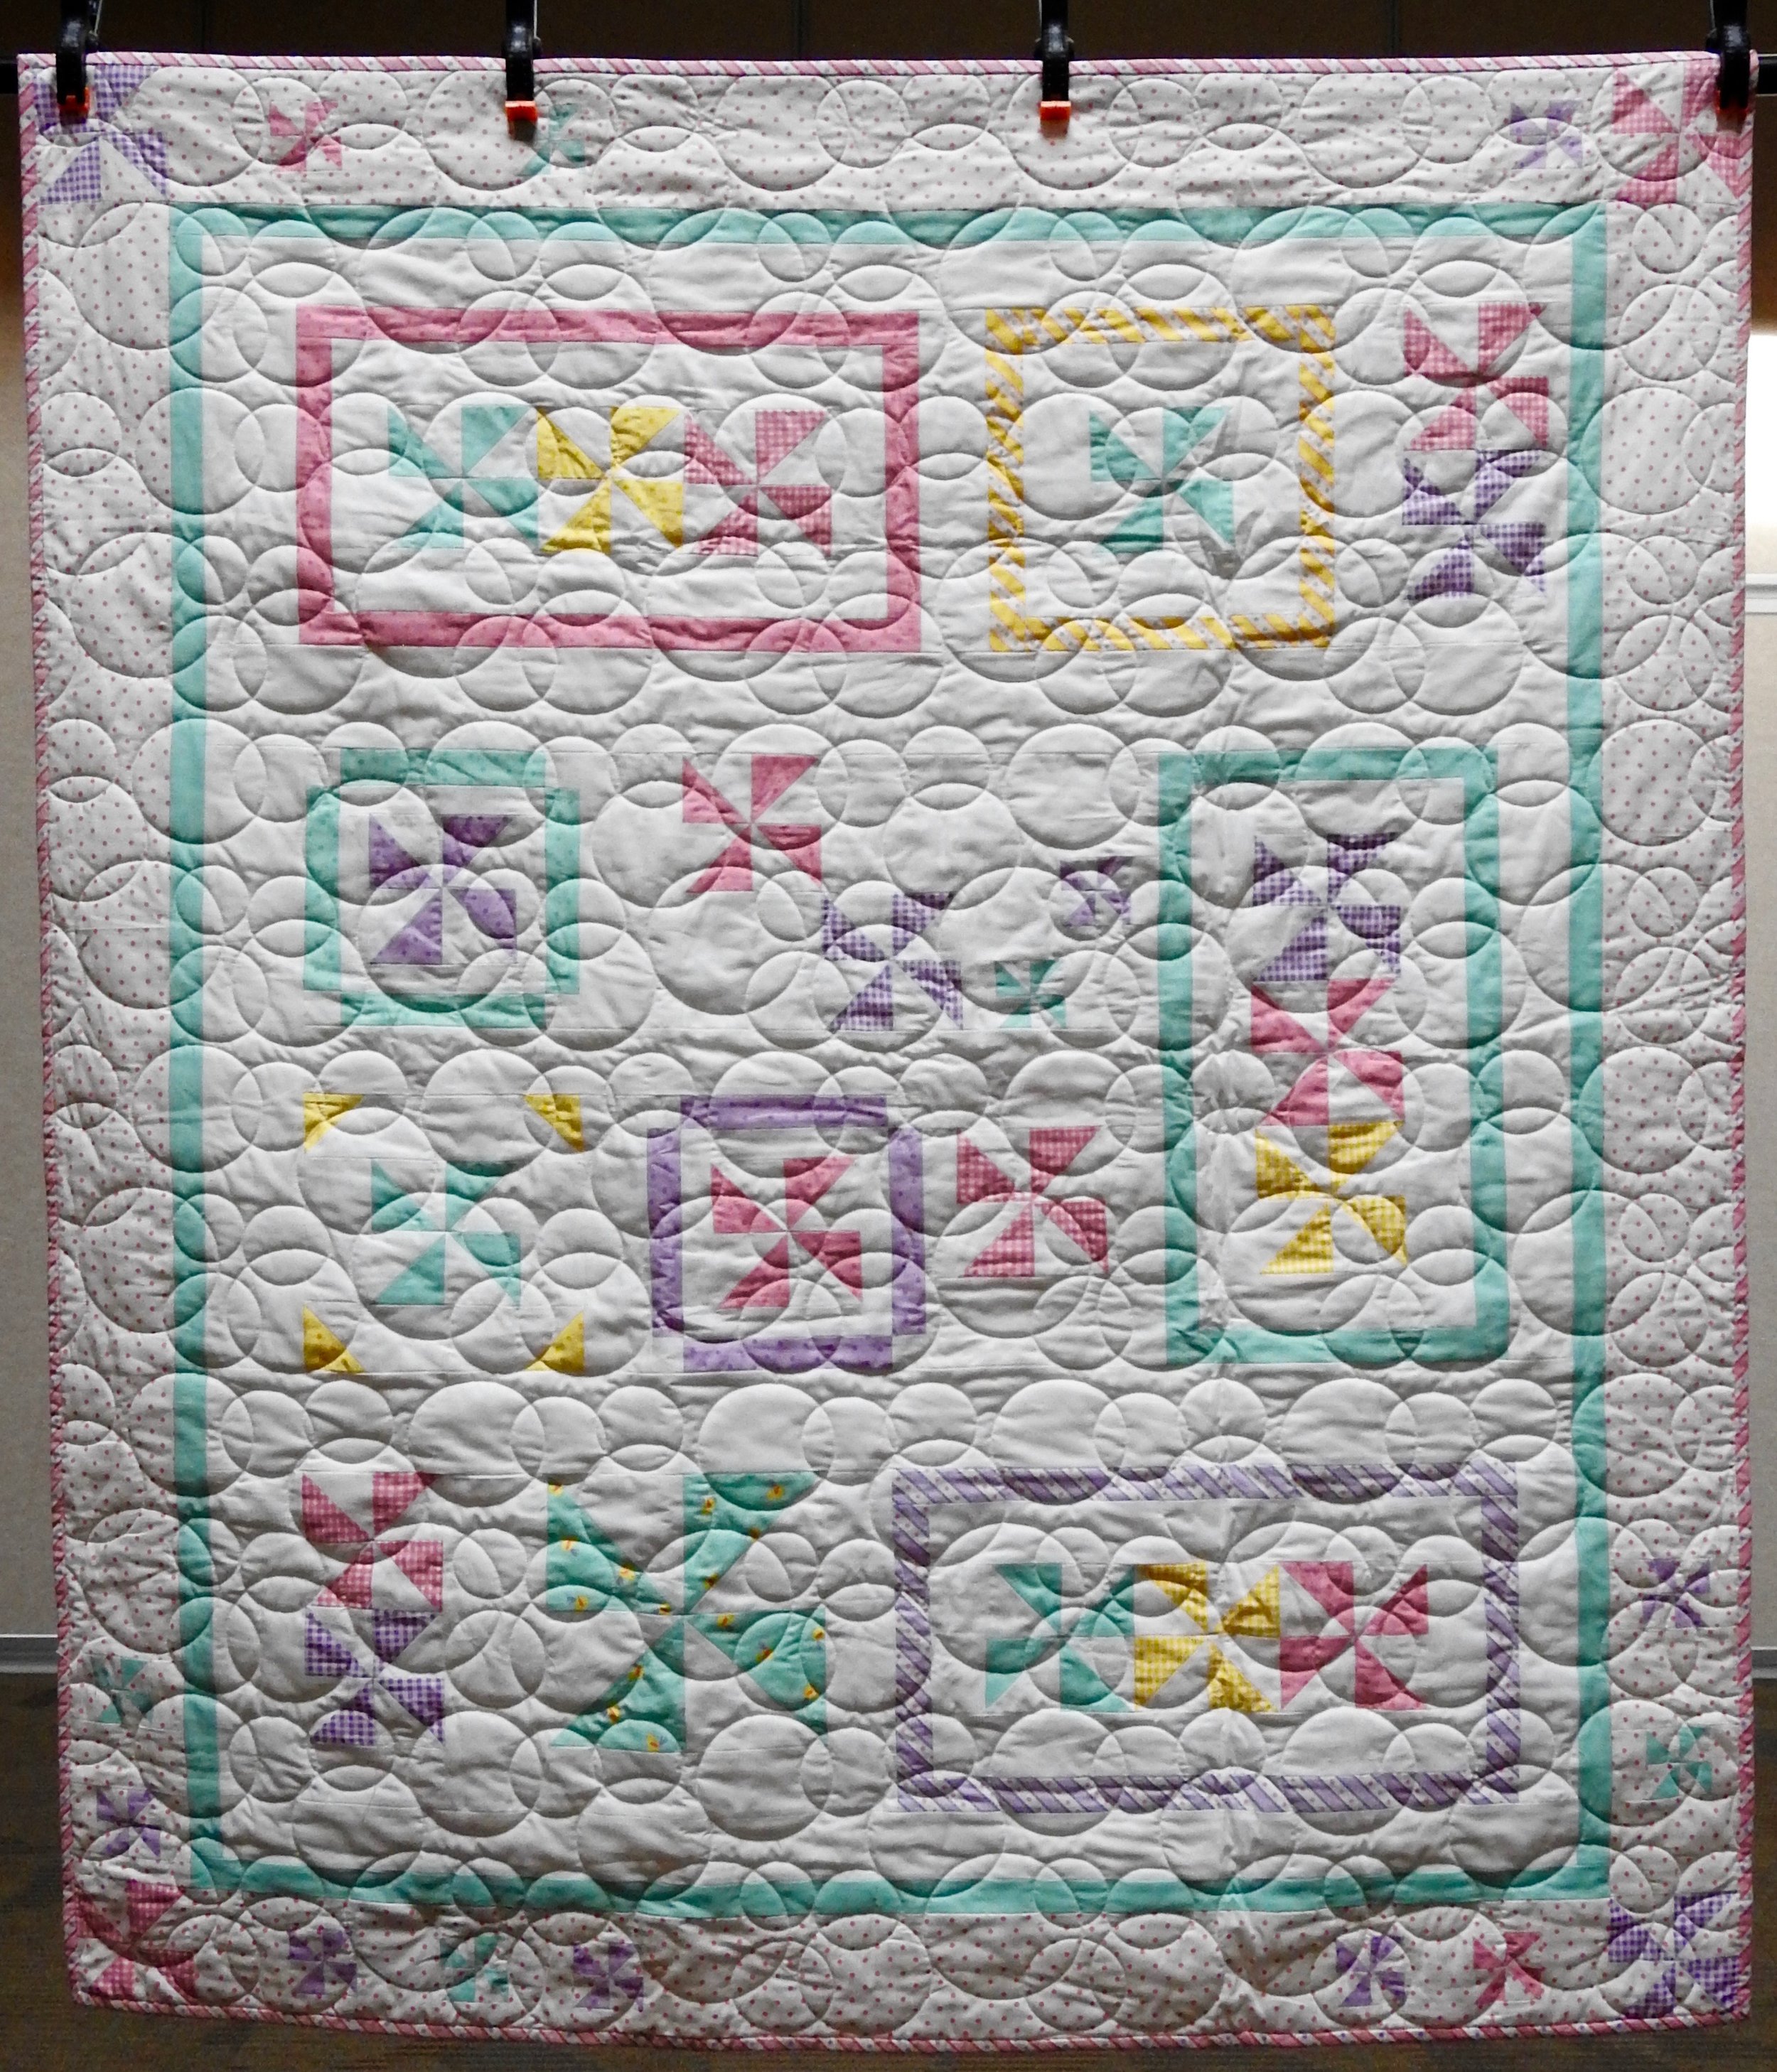 Sweet Dreams, Pieced (Bunny Hill Designs) Edge to edge Machine Quilted, donated by Andrea Elliott, 50 x 58”